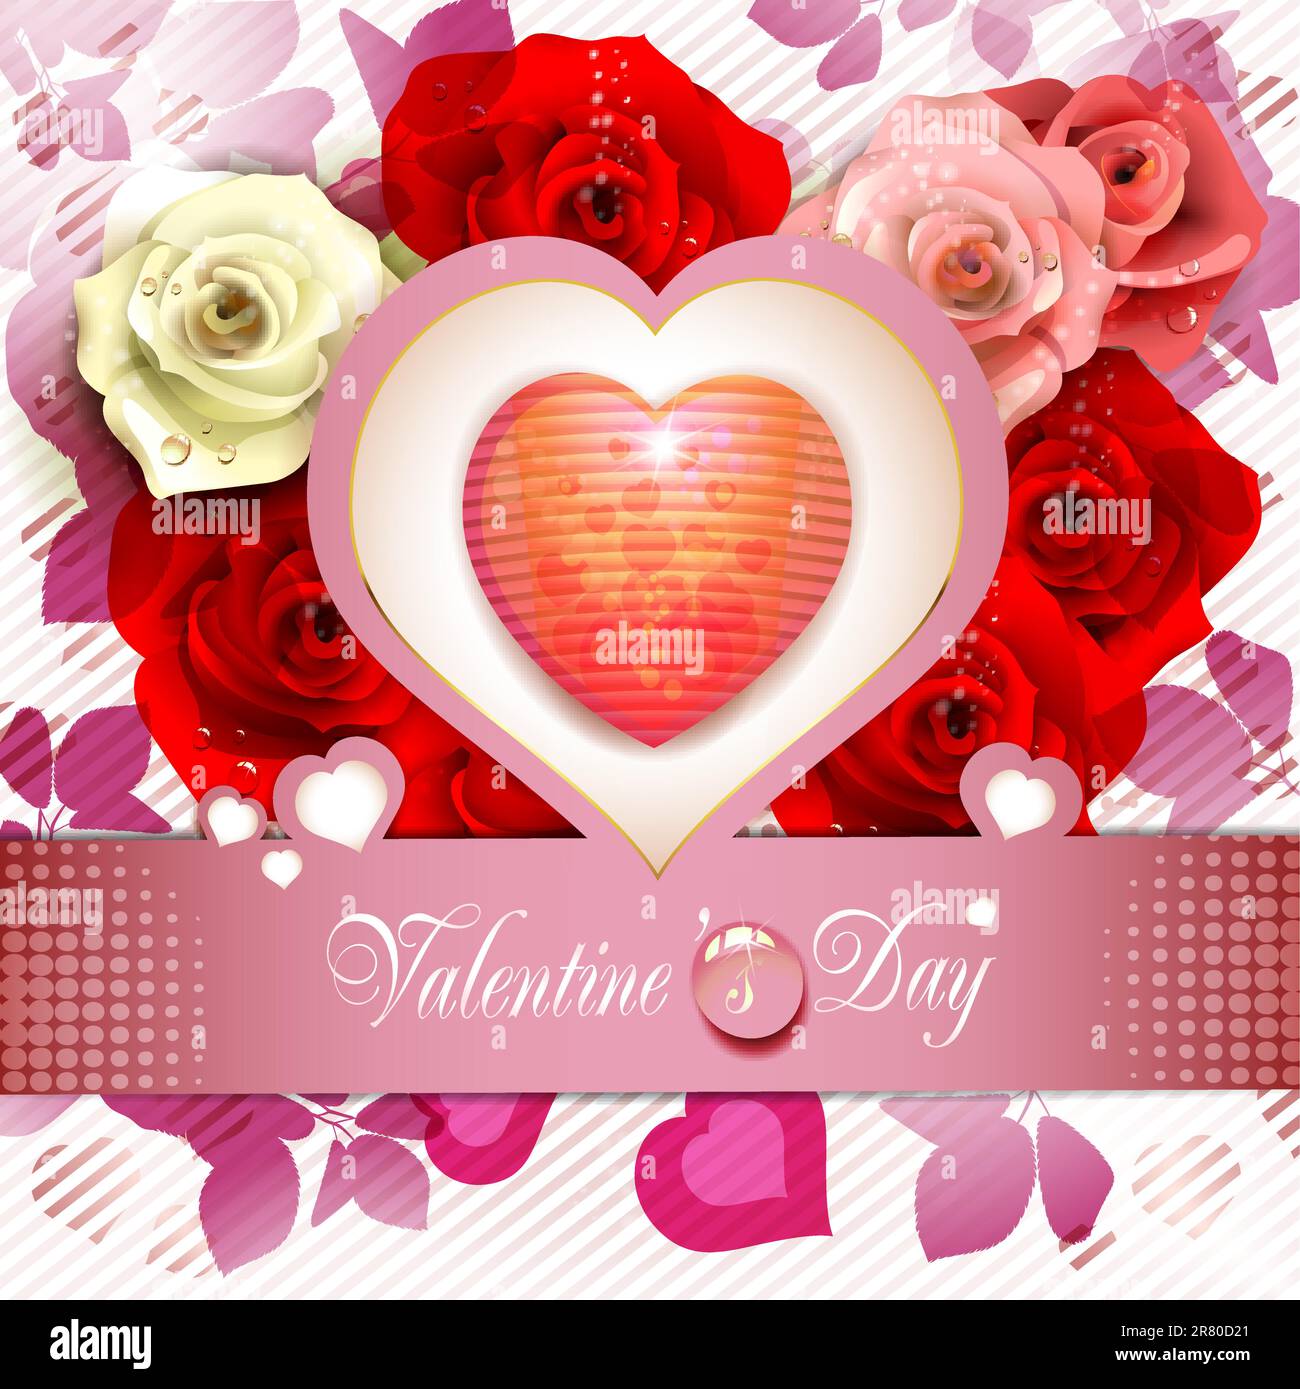 Heart over floral background with roses Stock Vector